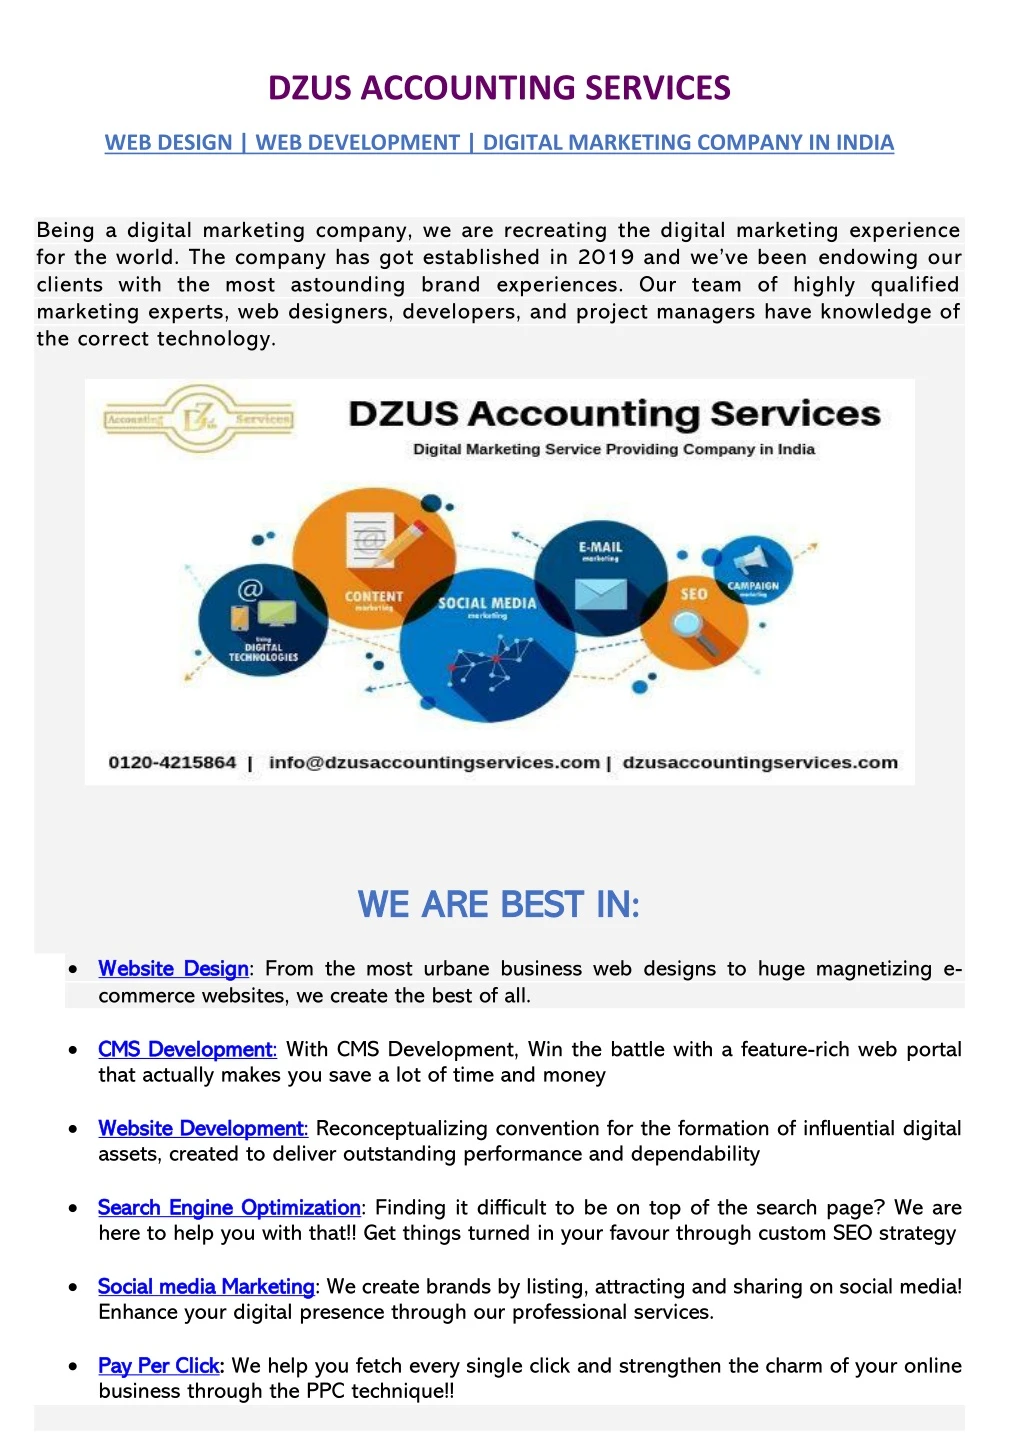 dzus accounting services